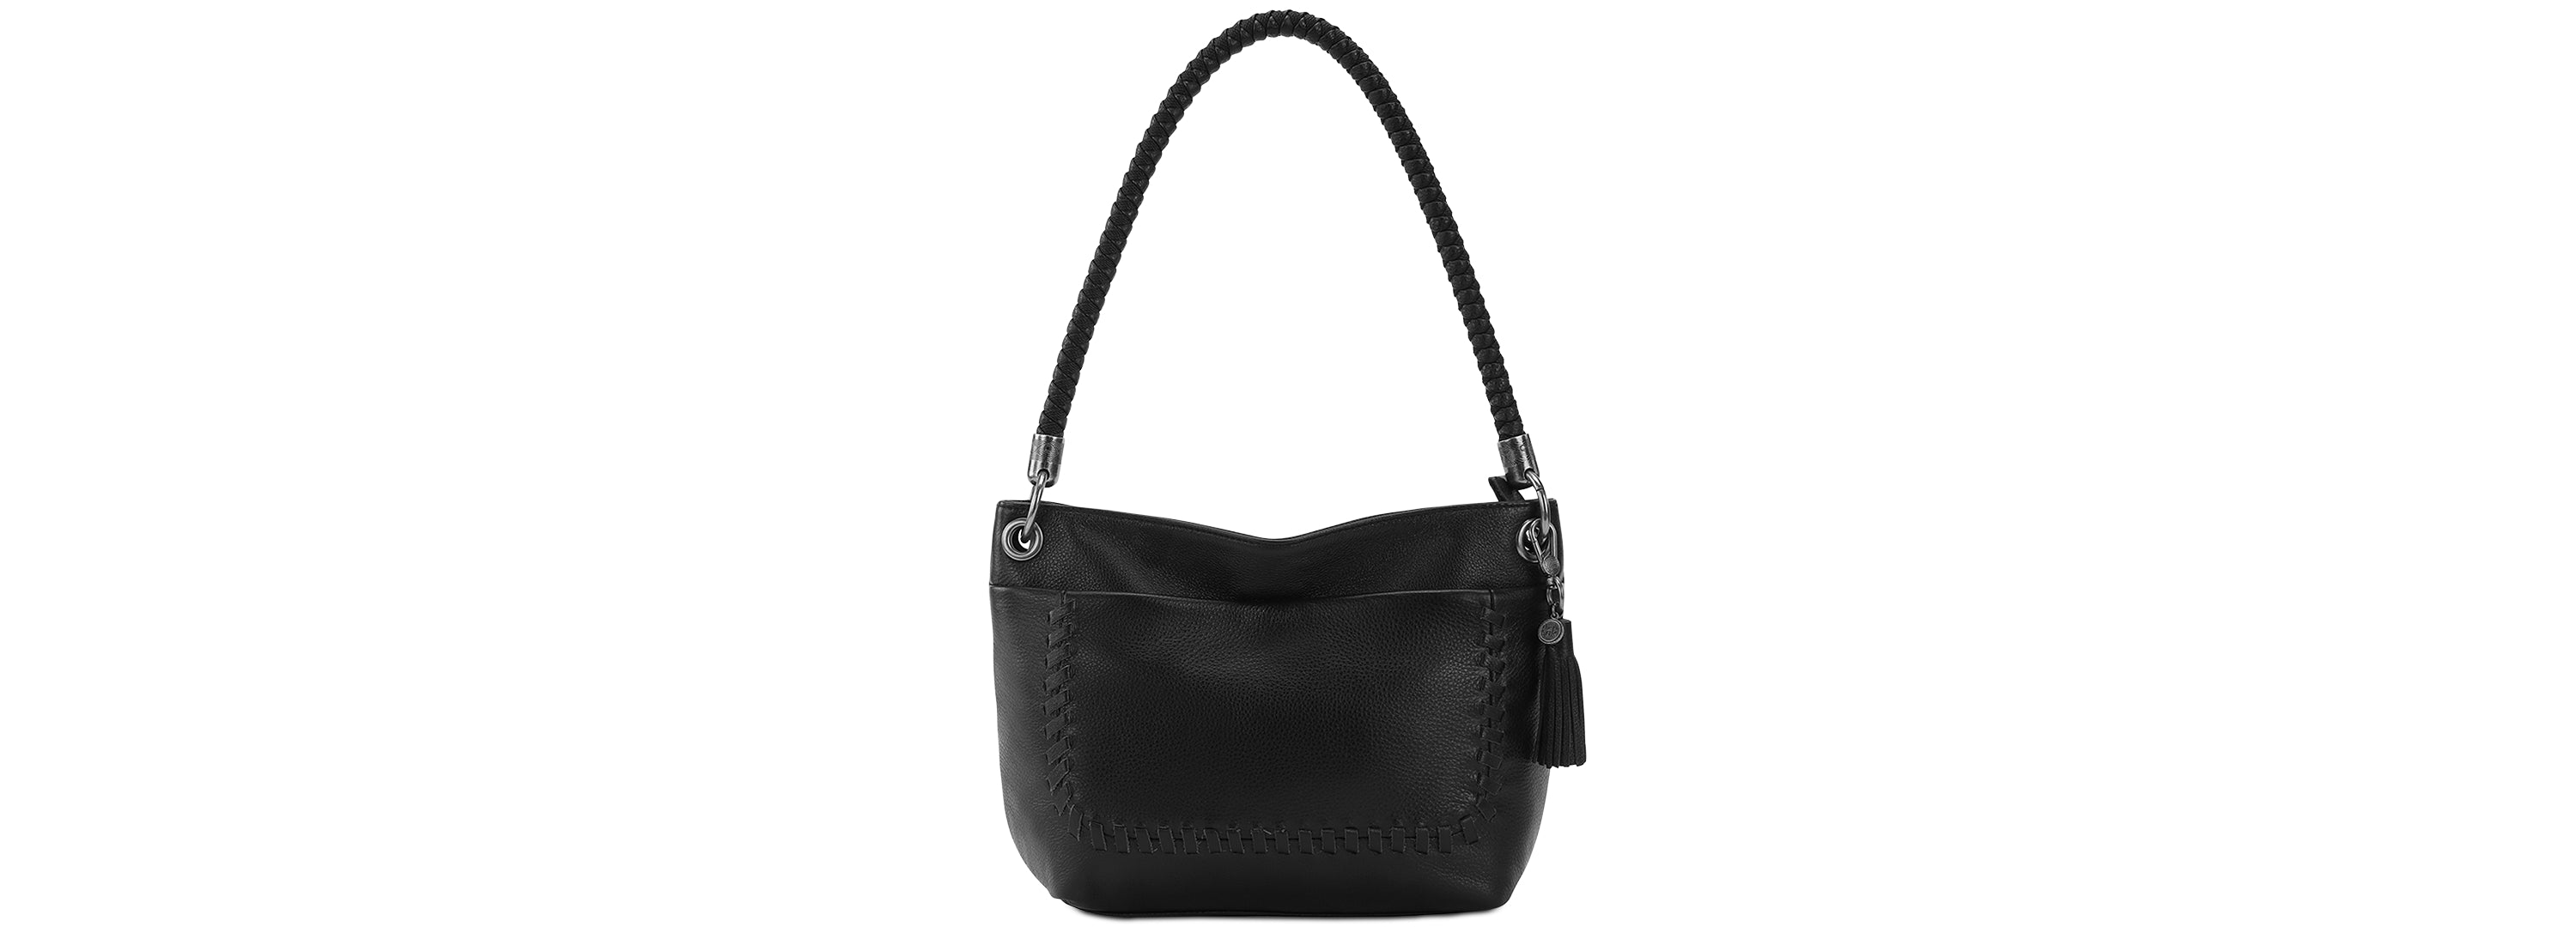 The Sak Womens Flores Leather Hobo